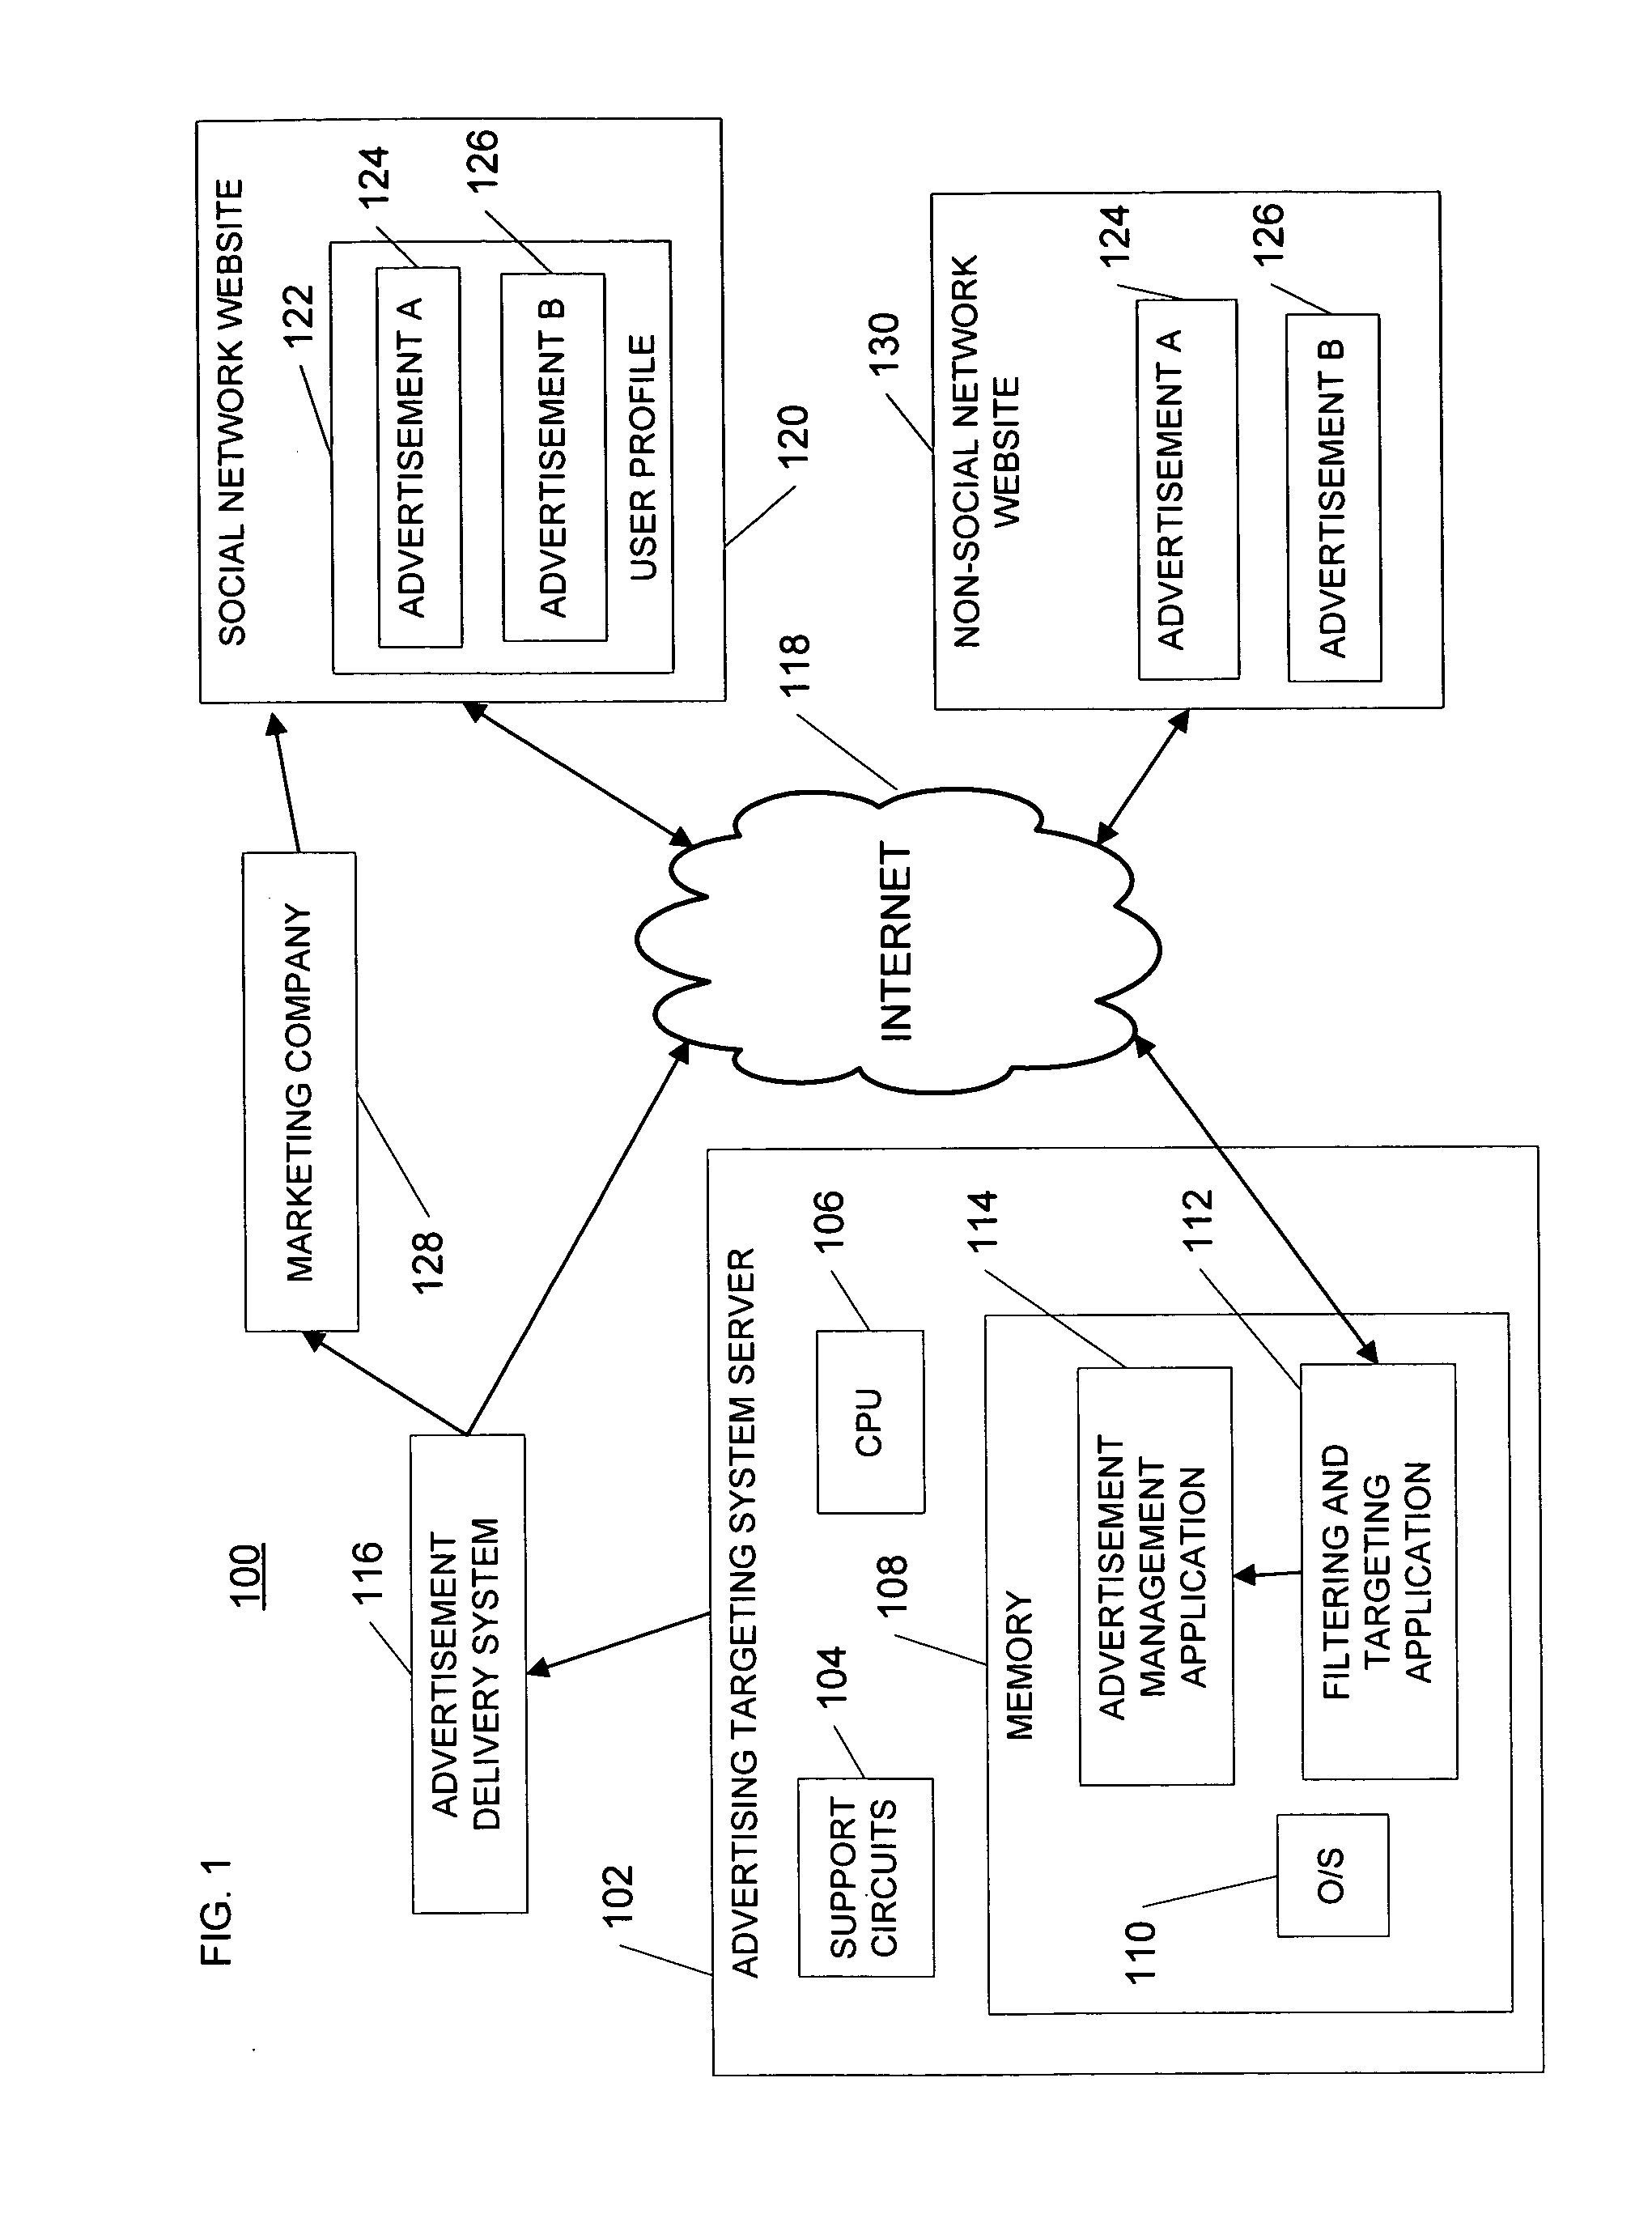 System and method for implementing advertising in an online social network